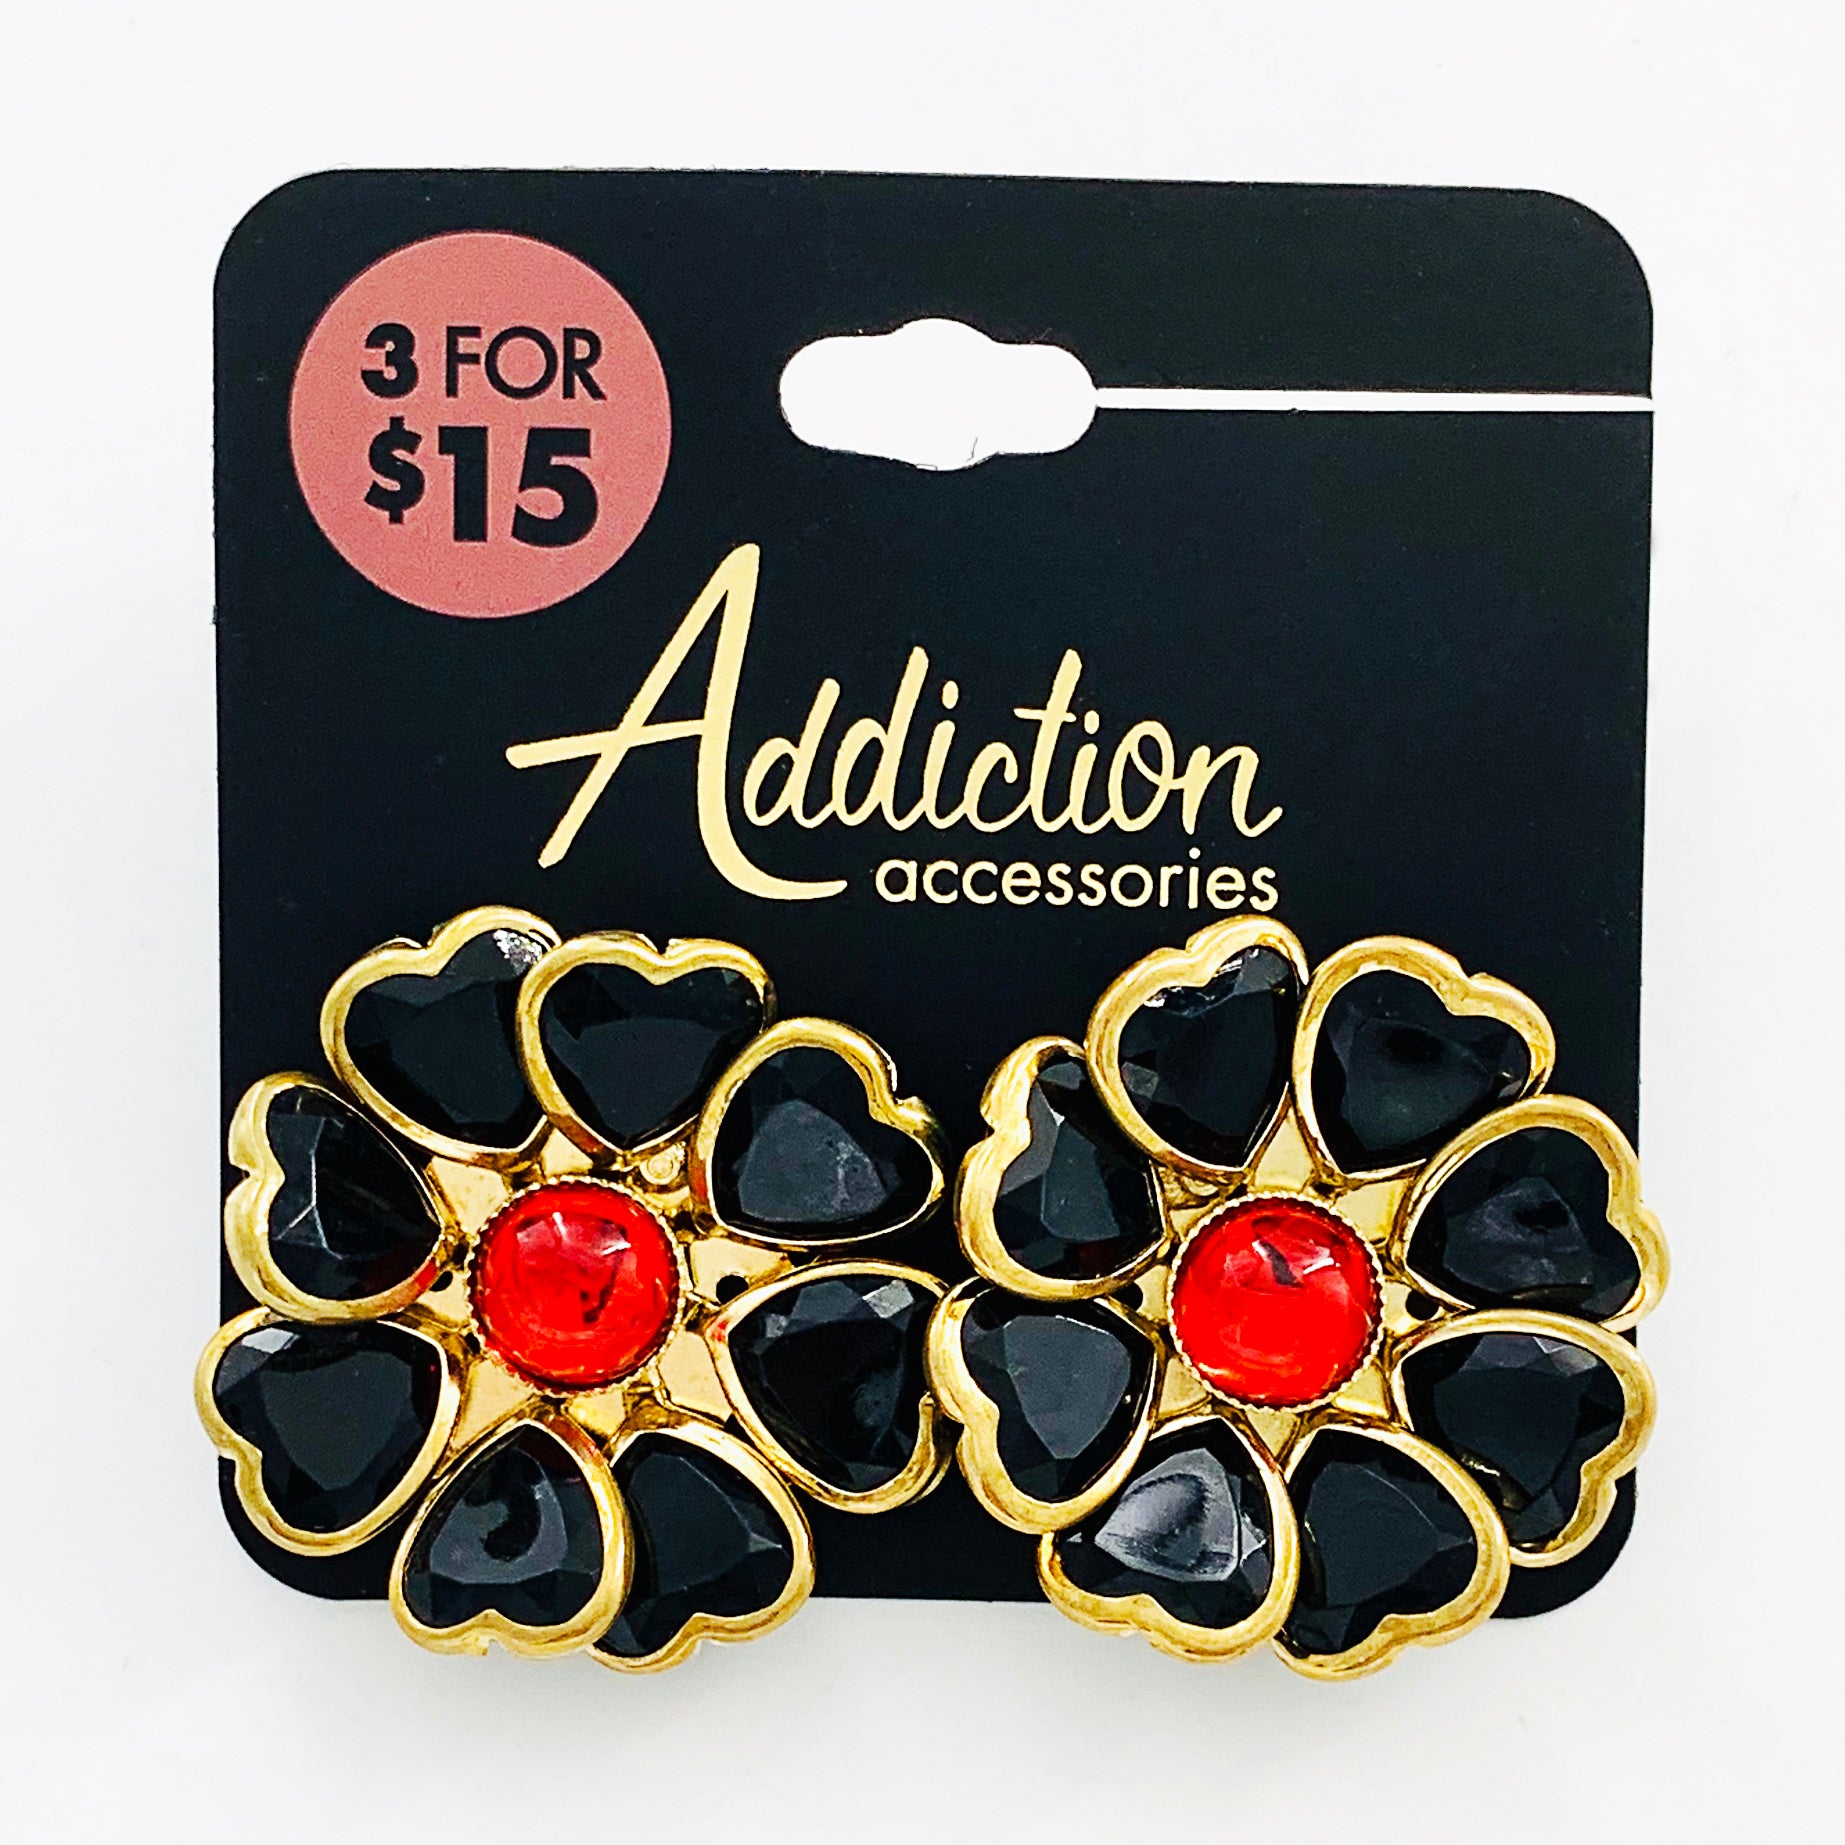 Flower earrings with black heart-shaped petals and red gem